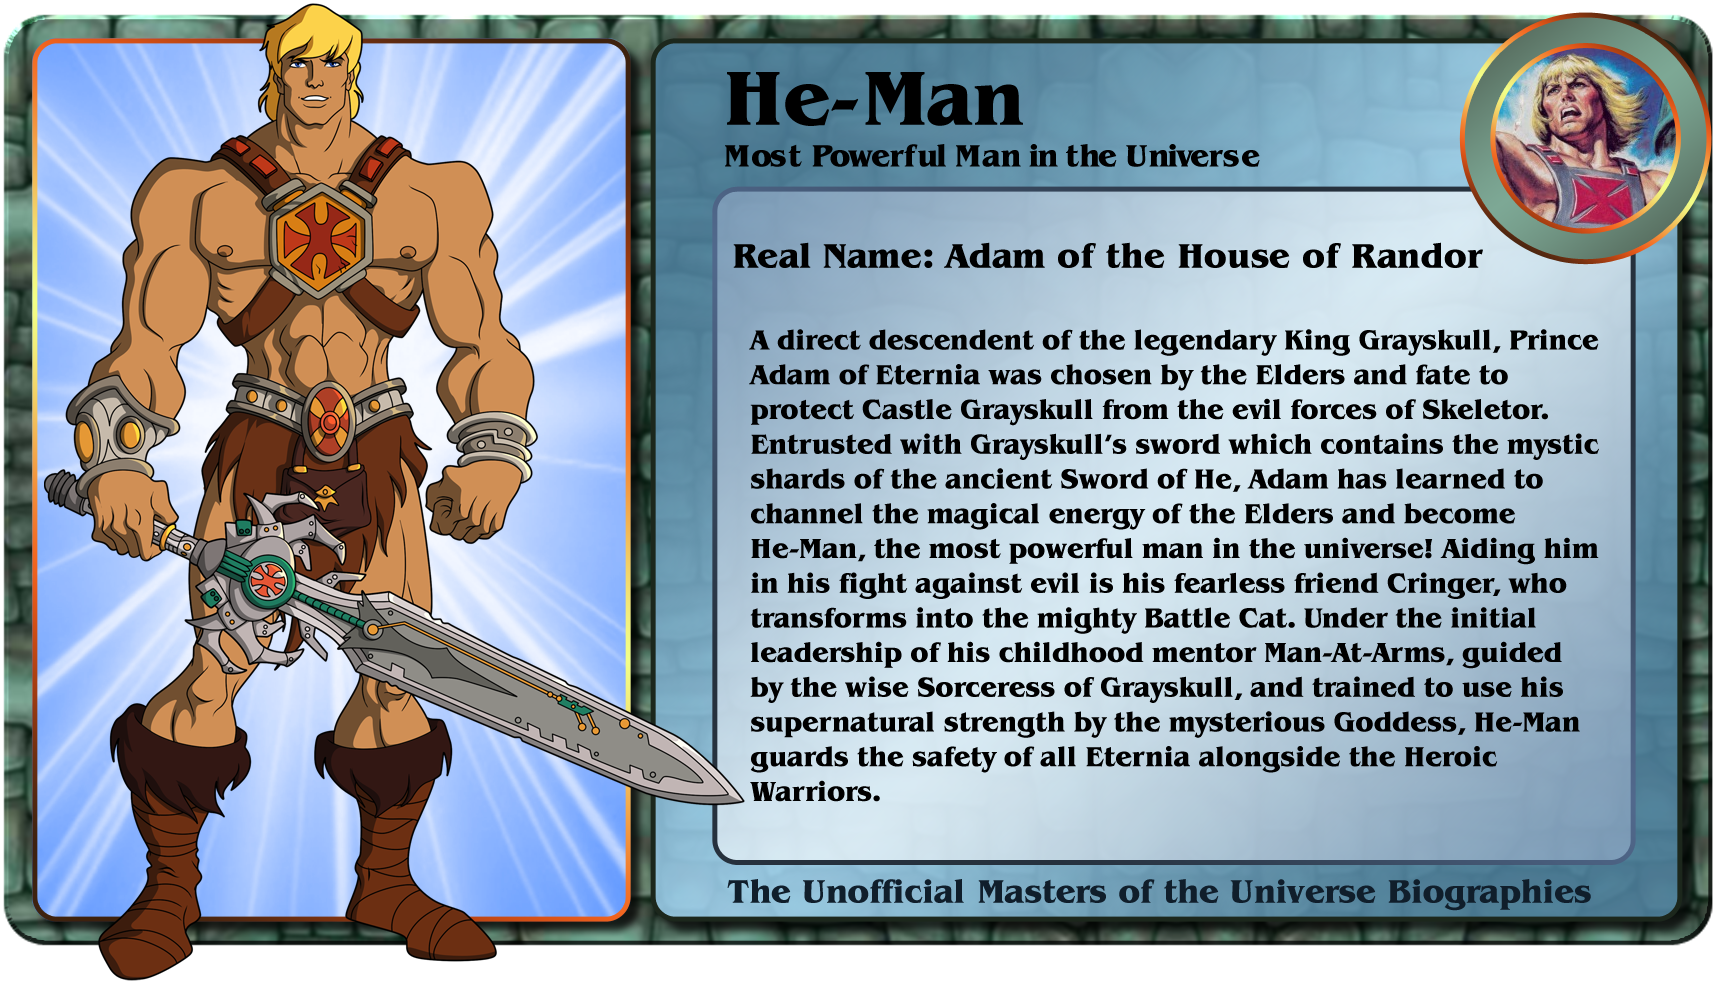 Aiding the 1 Hero. He man Mantenna рус. Umbros, the enigmatic God of Shadows. Many men текст